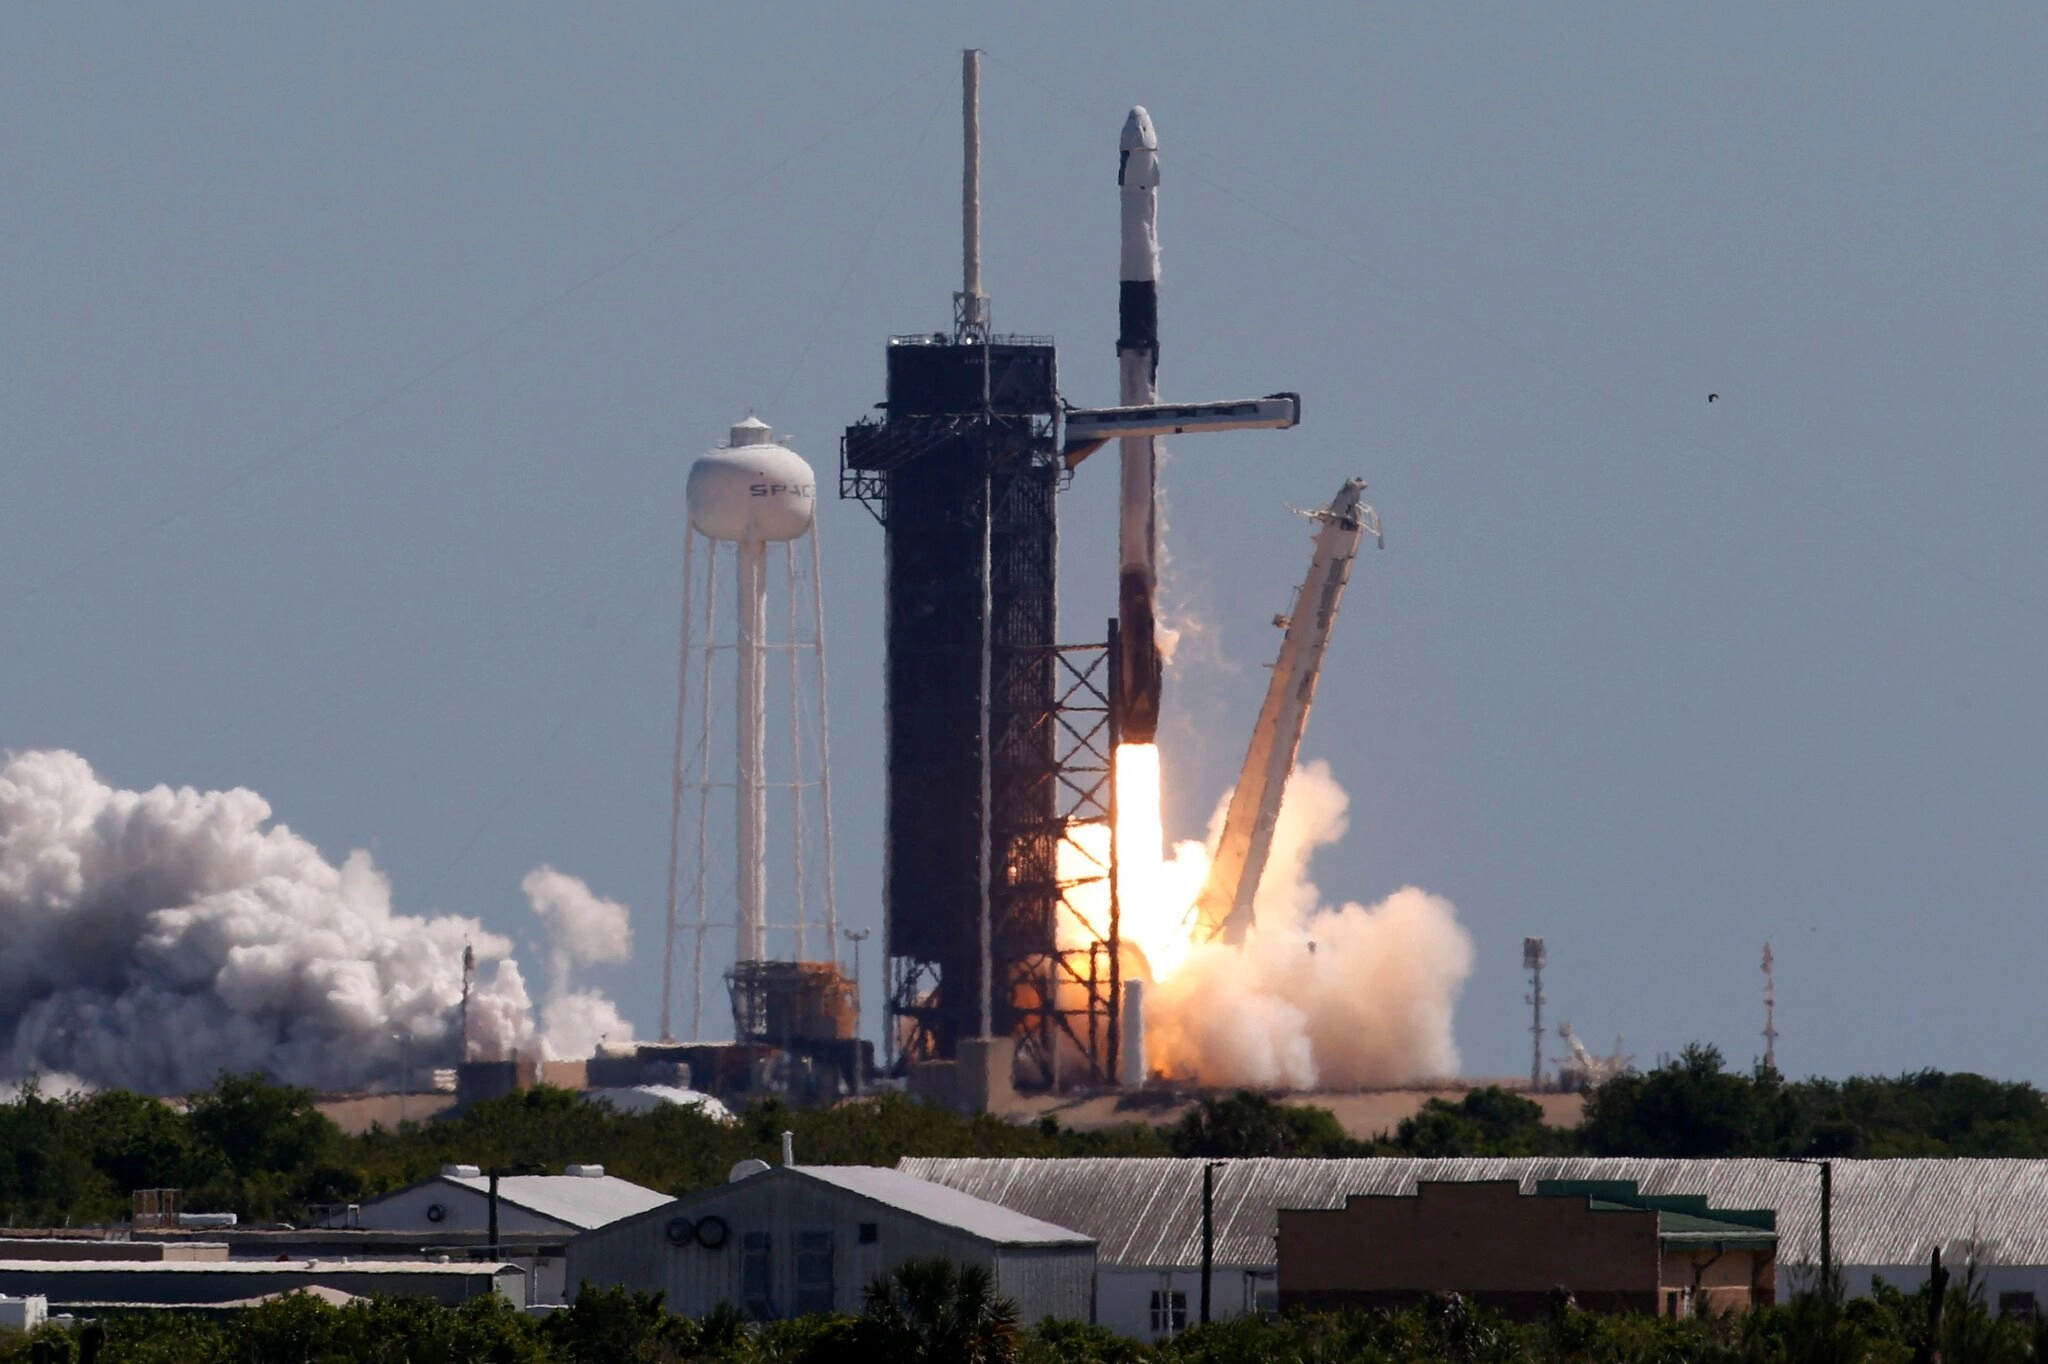 Launch and Deployment of Axiom Space's Ax-2 Mission